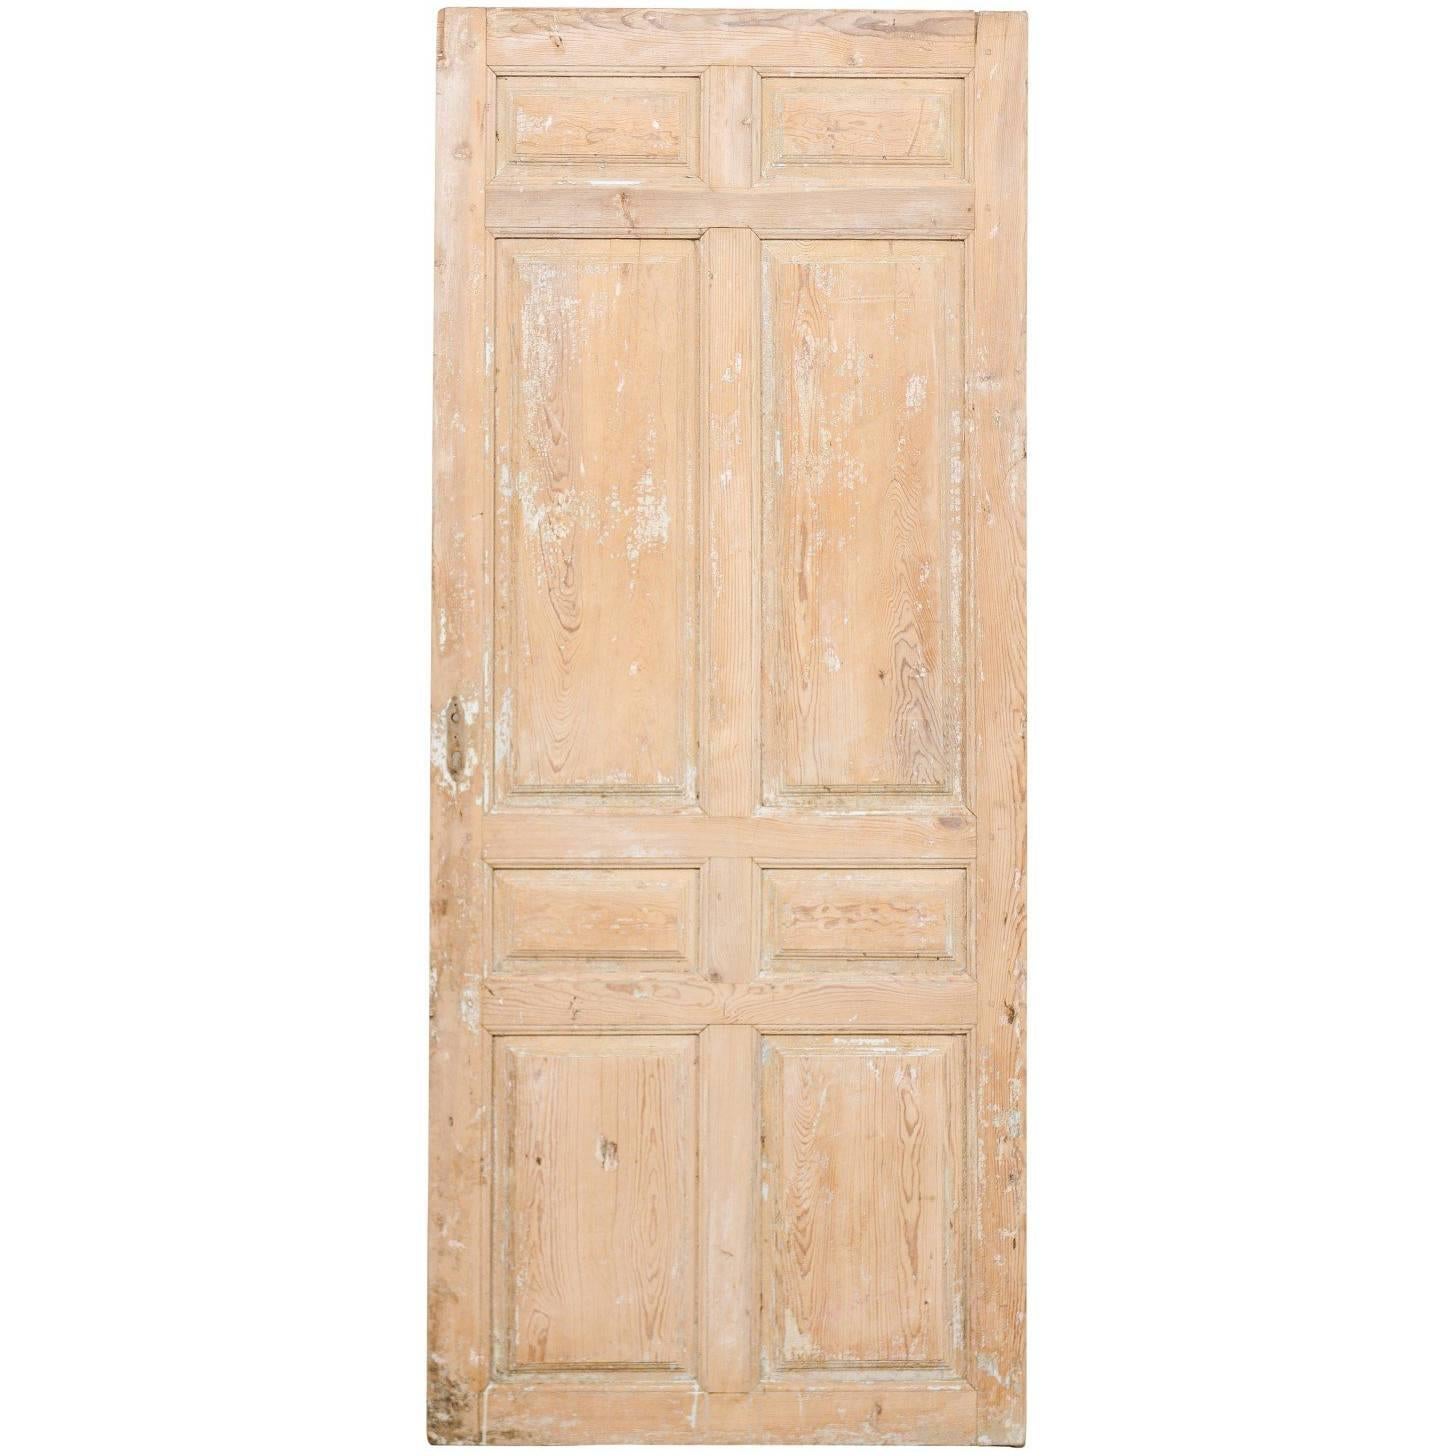 Single French 19th Century, Eight-Panel Door with Natural Pale Wood Finish